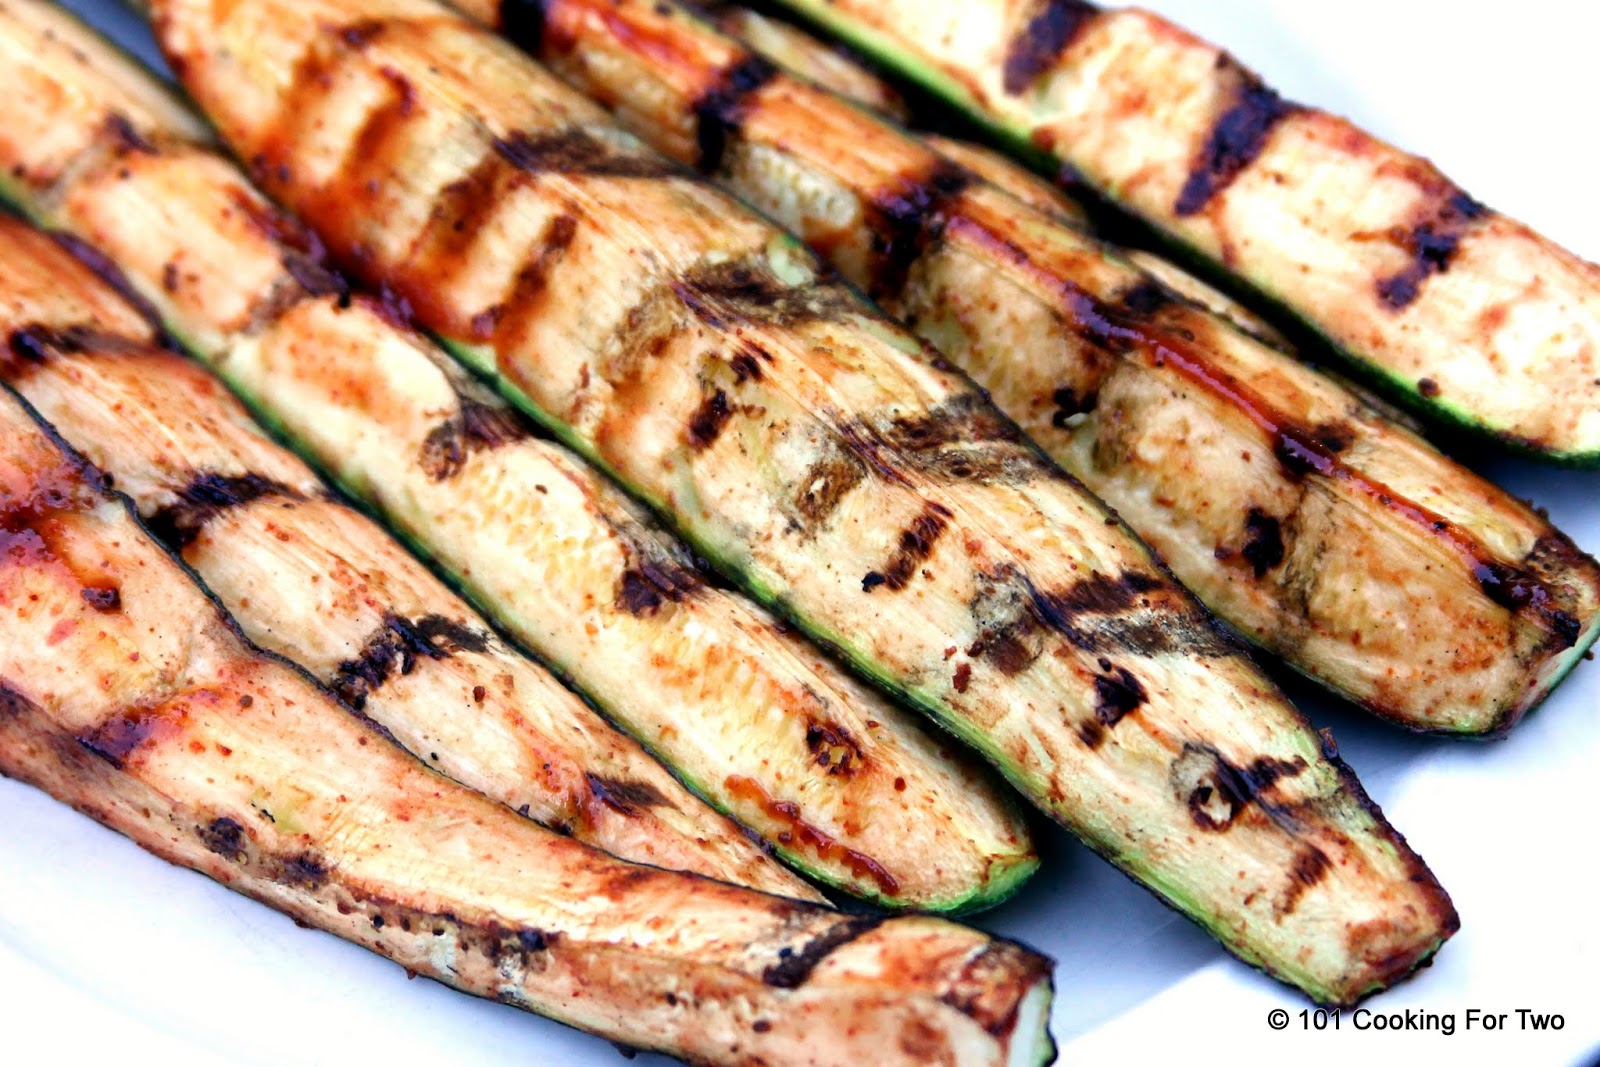 Grilled BBQ Zucchini from 101 Cooking For Two